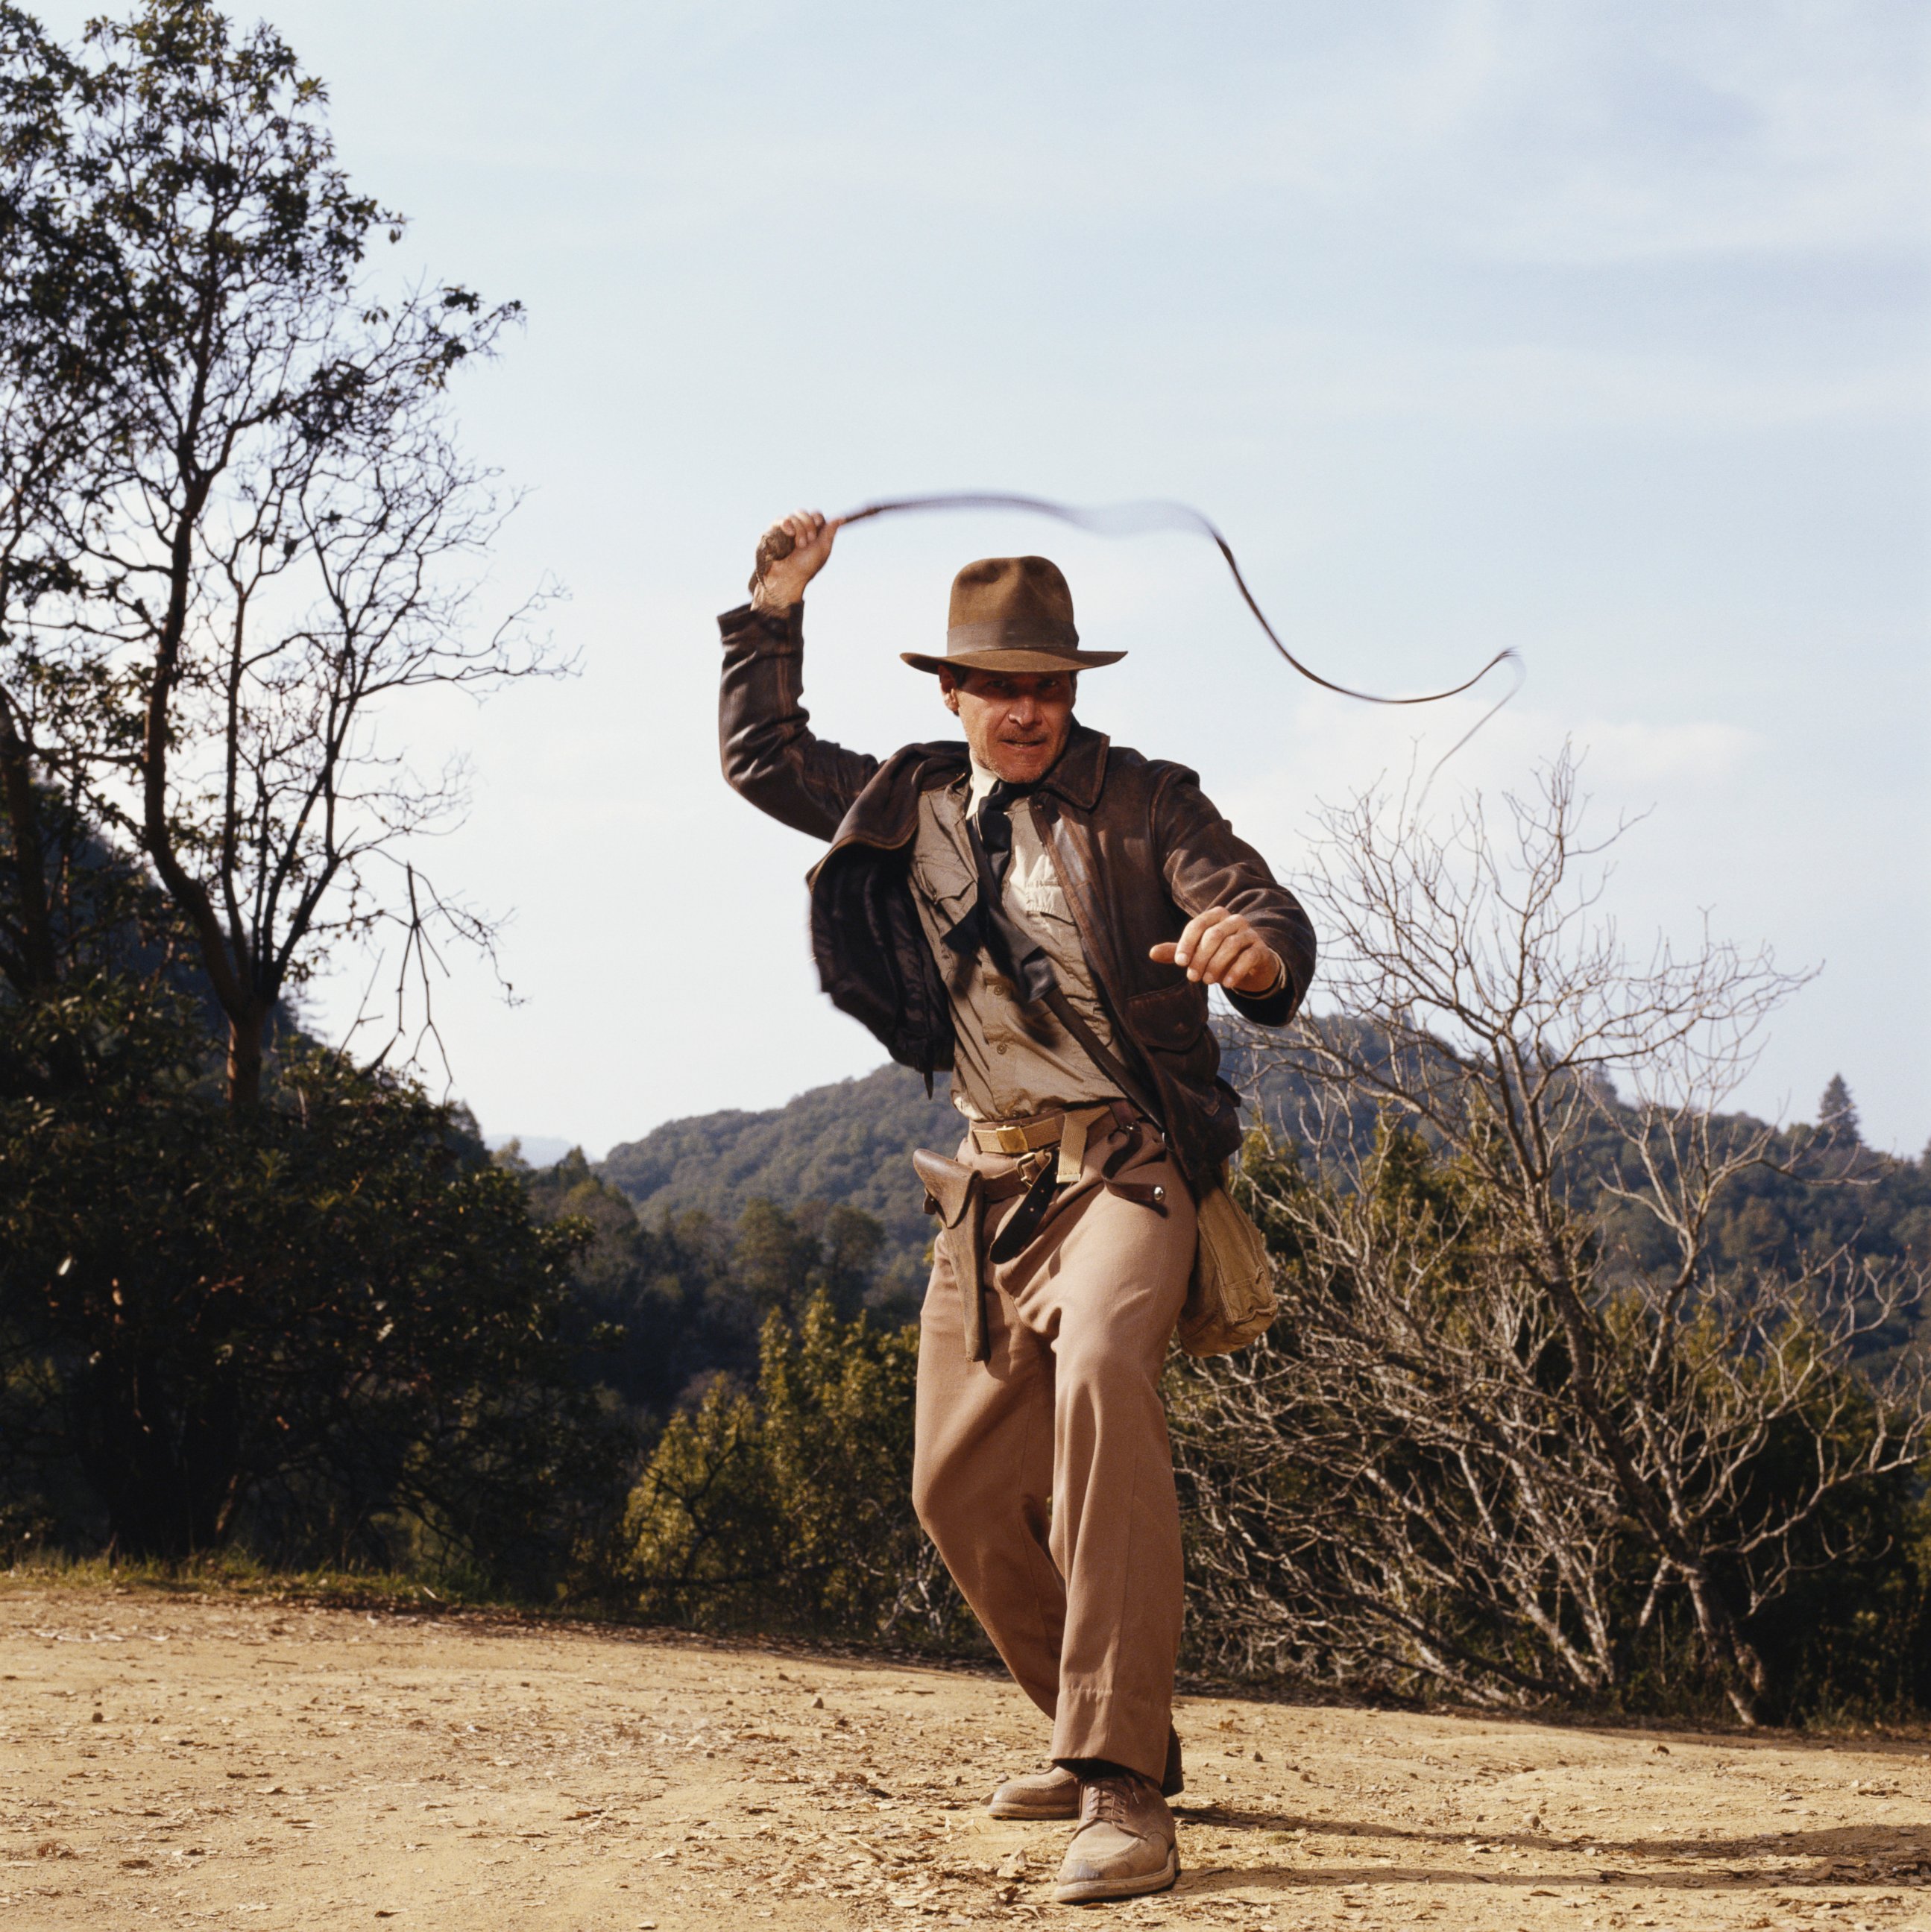 PHOTO: Harrison Ford in action as Indiana Jones.